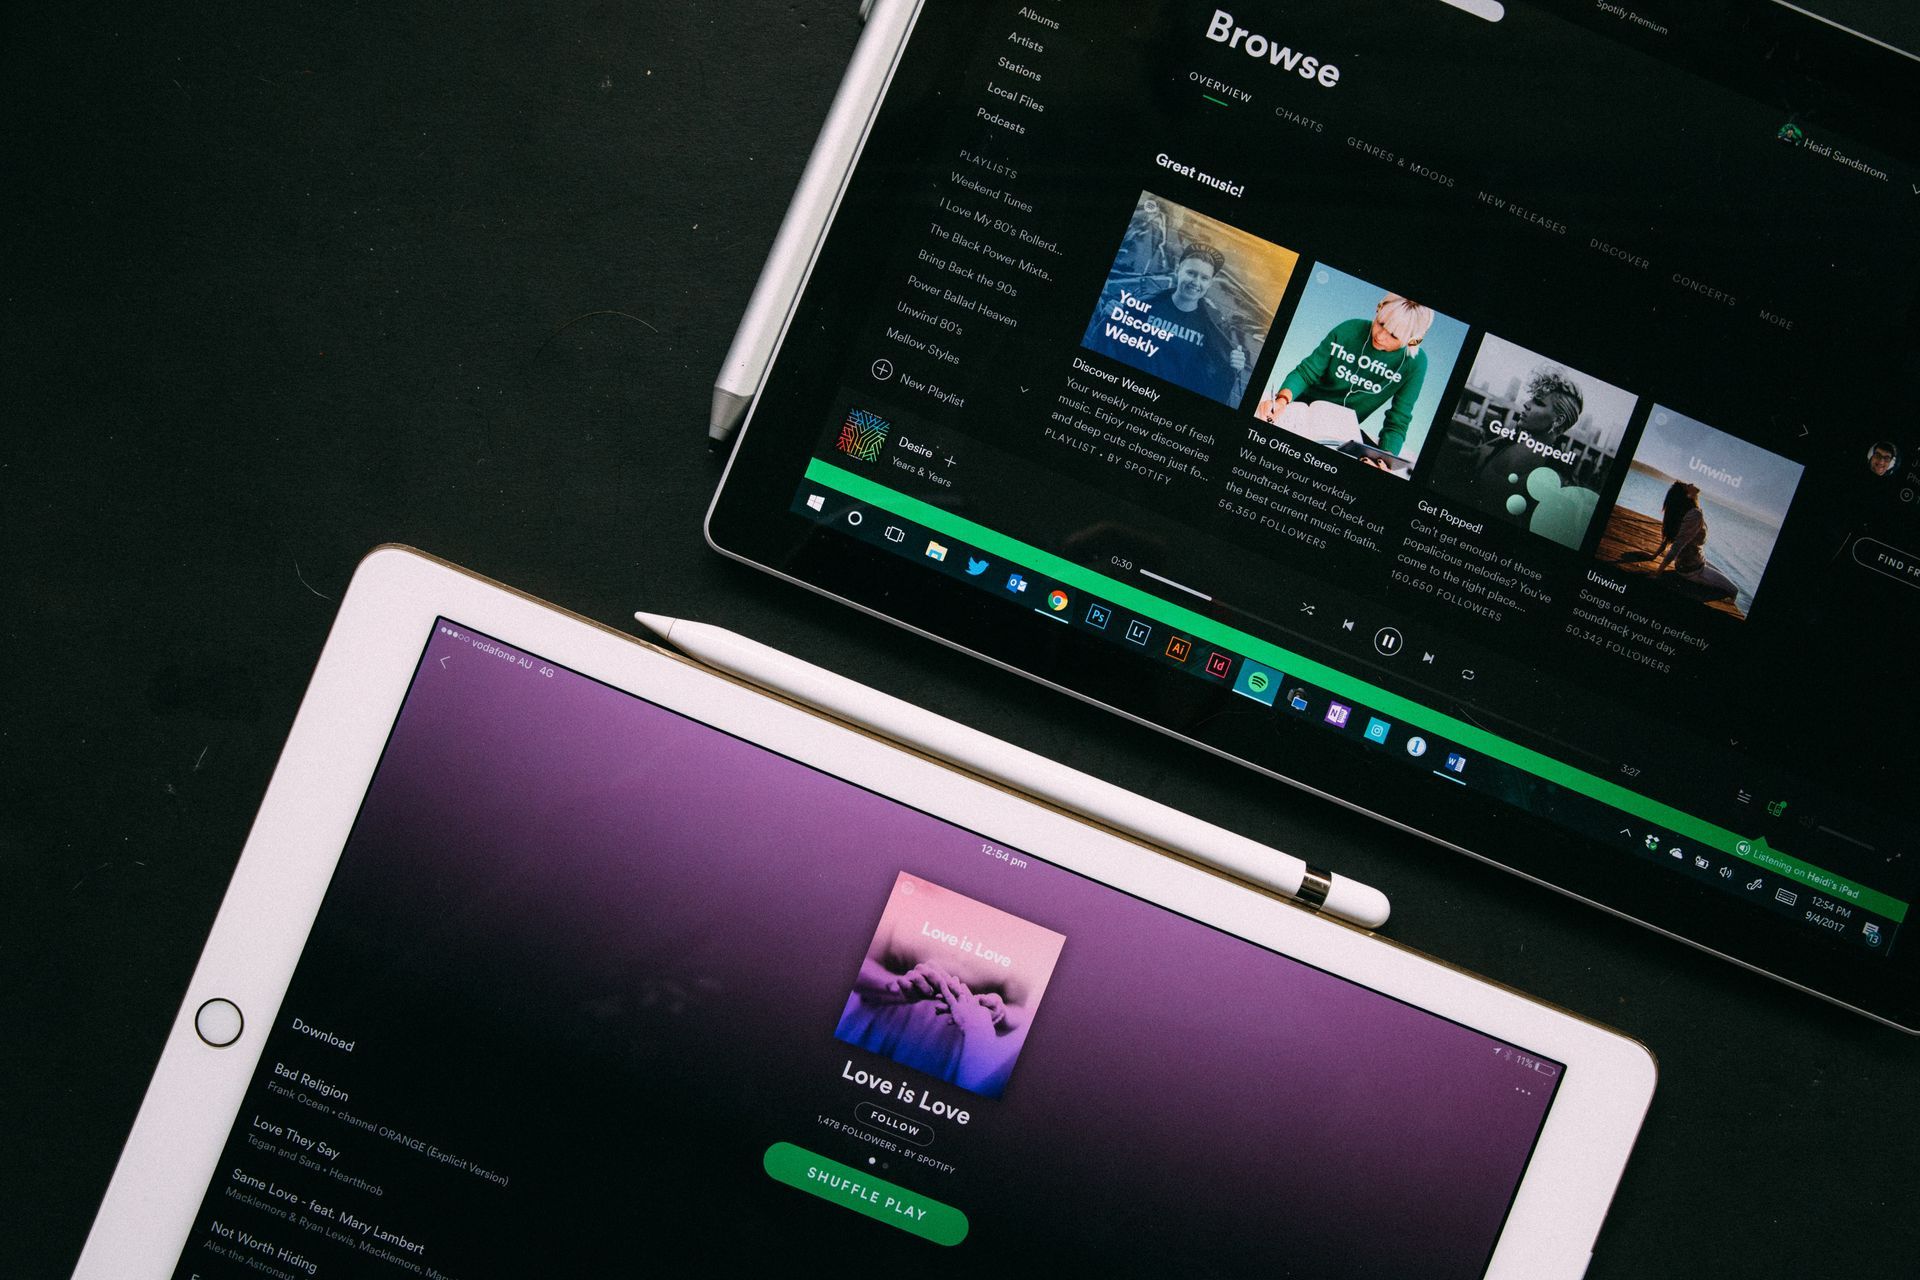 Discover Spotify's groundbreaking AI voice translation feature, bringing podcasts to global audiences in their own language. Explore now!